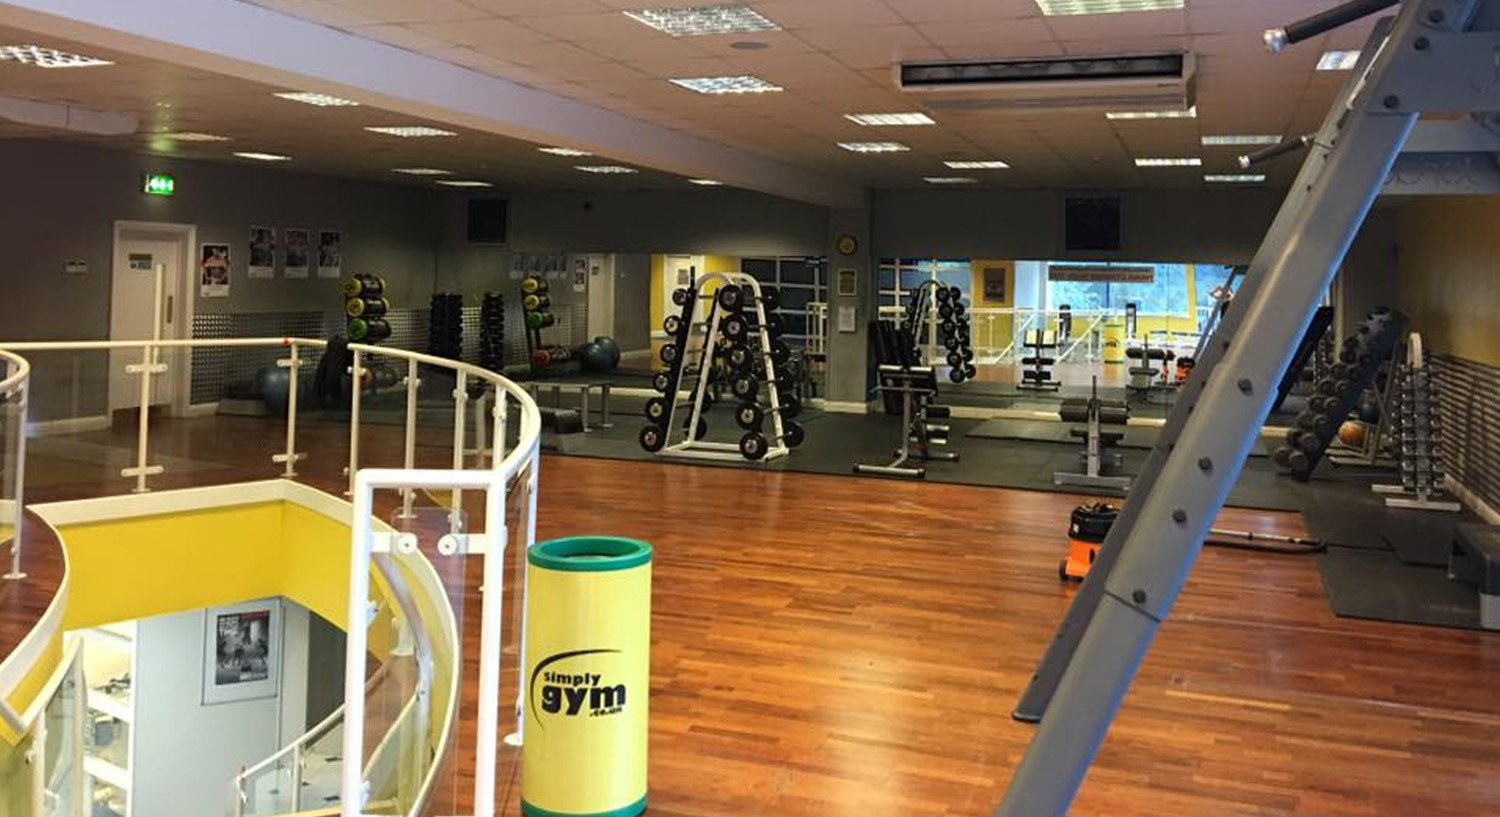 Simply Gym Swindon - Weights Section